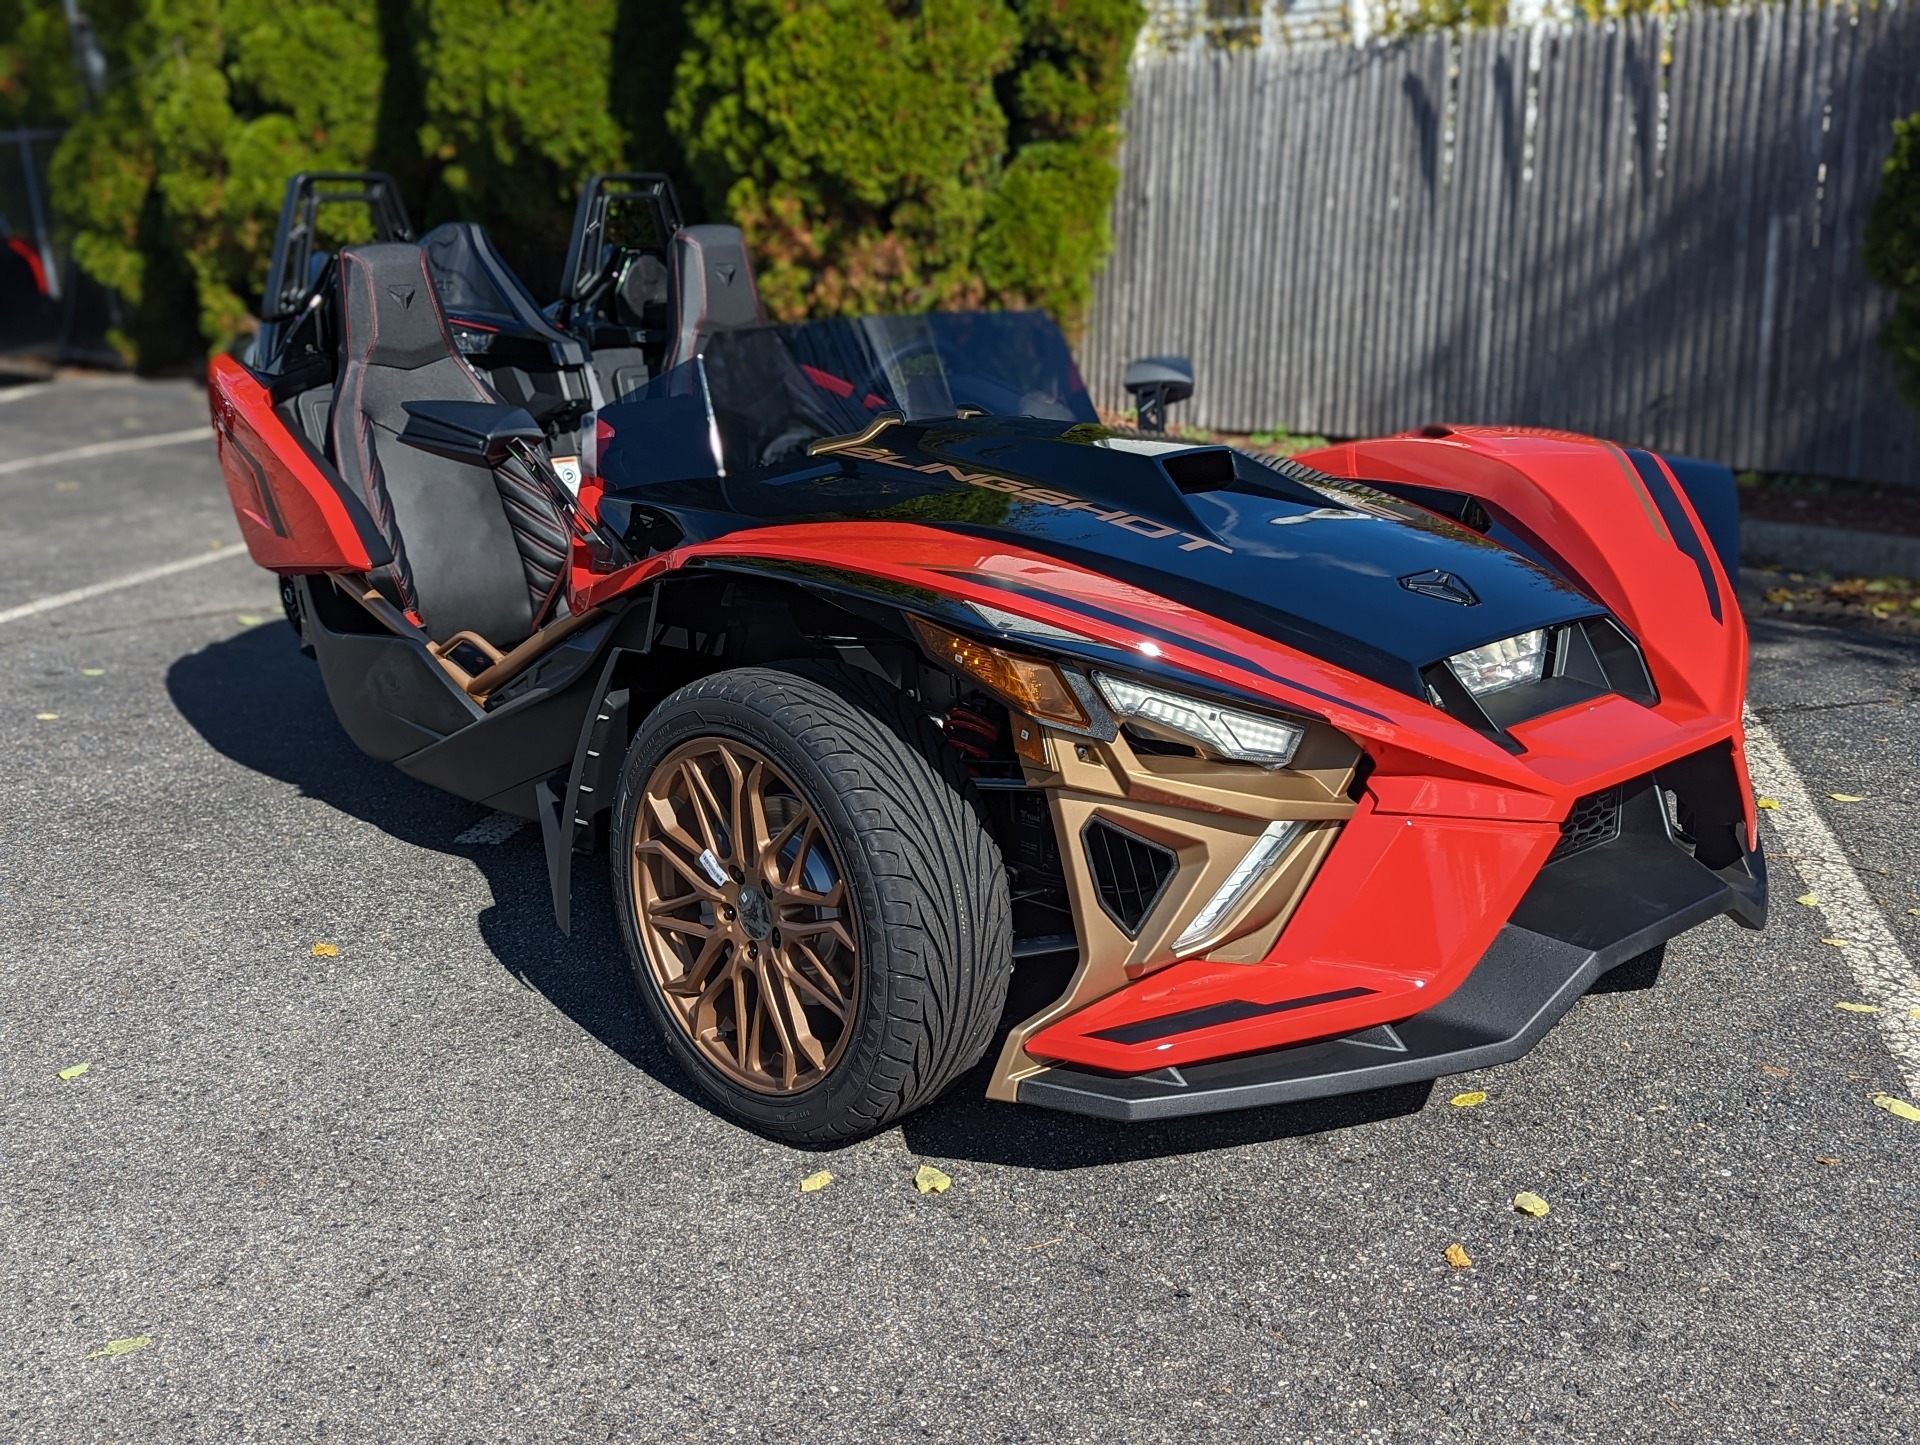 2022 Slingshot Signature Limited Edition AutoDrive in Mahwah, New Jersey - Photo 1